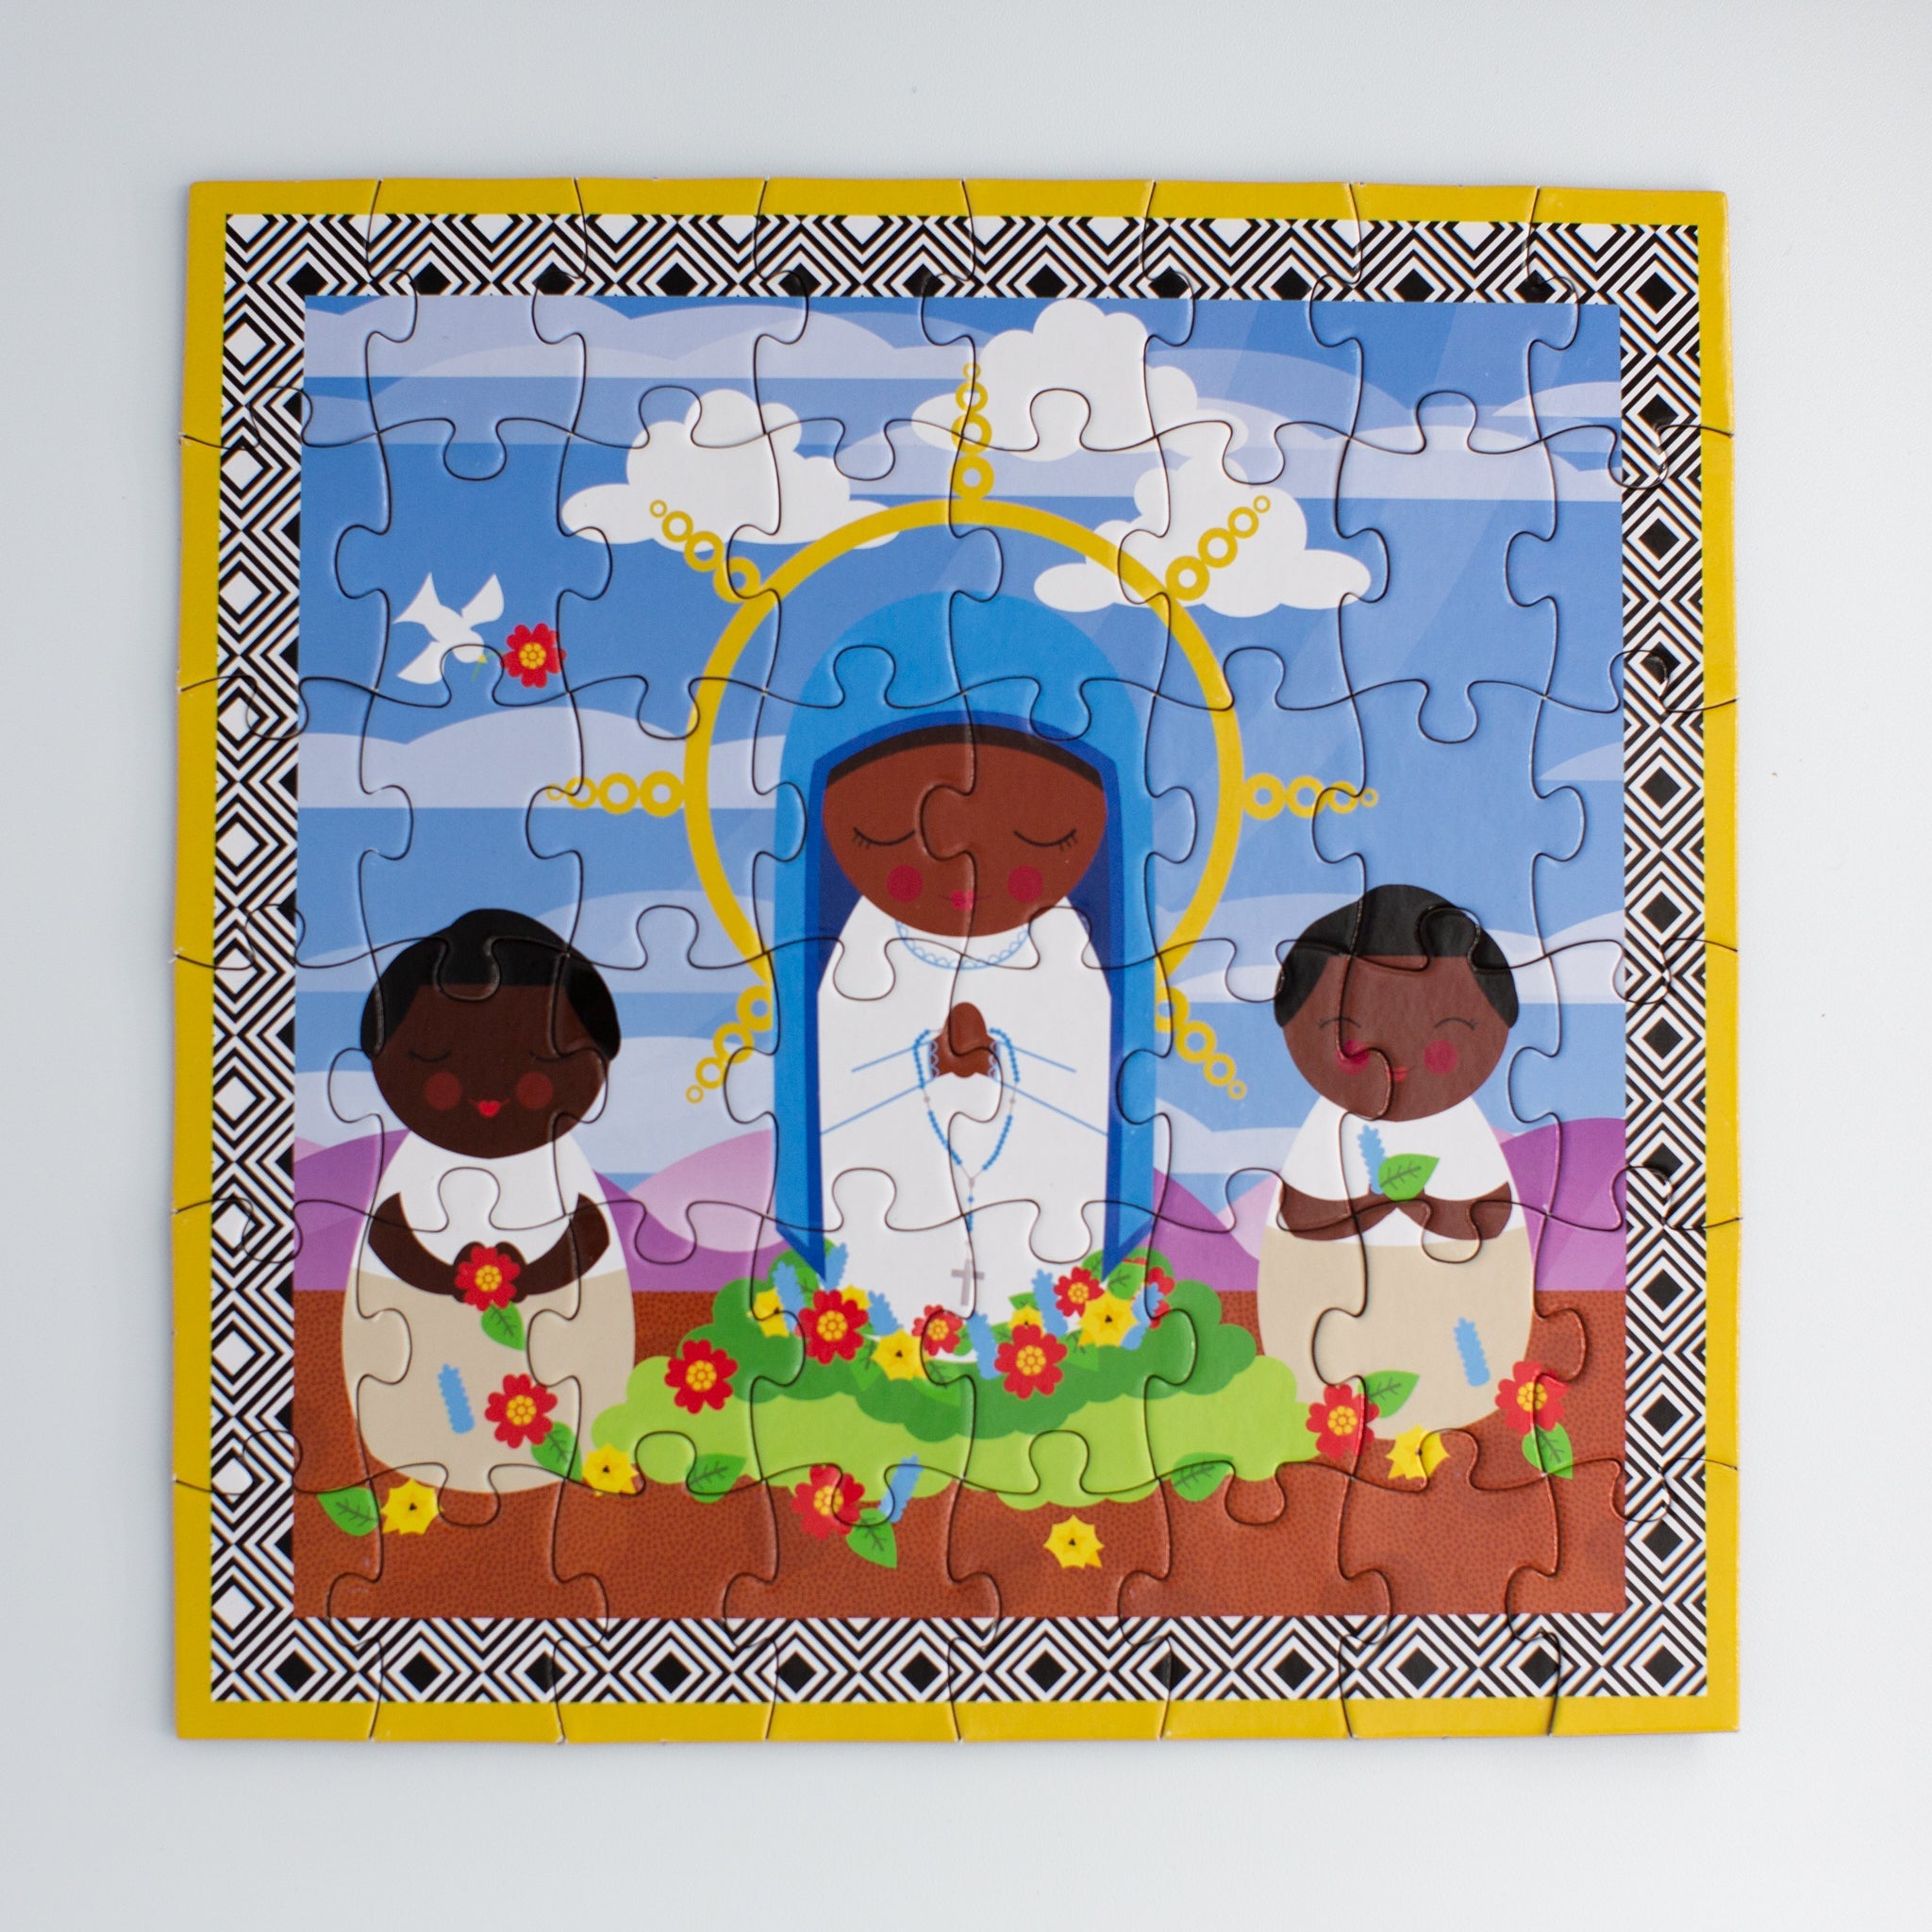 Our Lady Of Kibeho Mini Puzzle